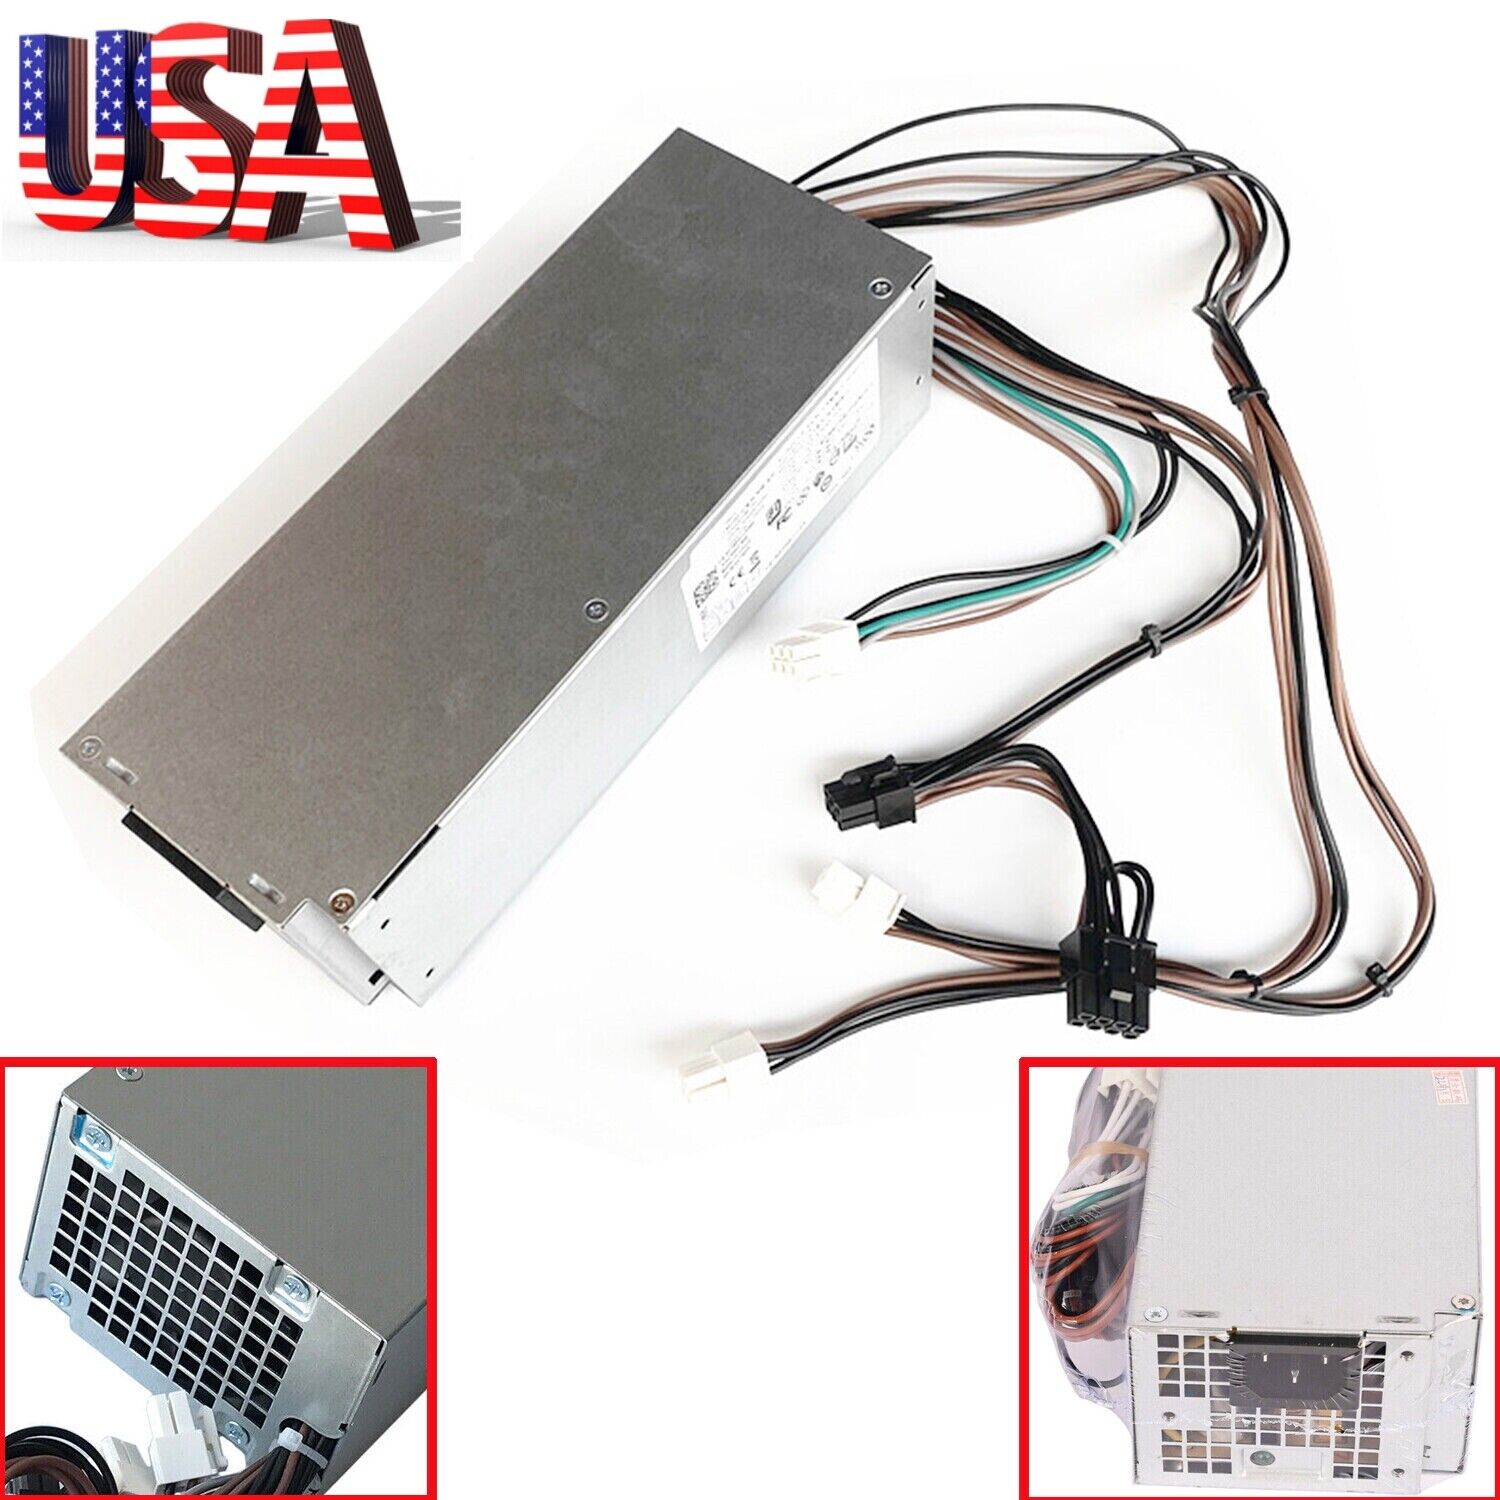 New Power Supply FOR Dell G5 XPS 8940 7060 5060 7080MT PSU D500EPM-00 5K7J8 500W